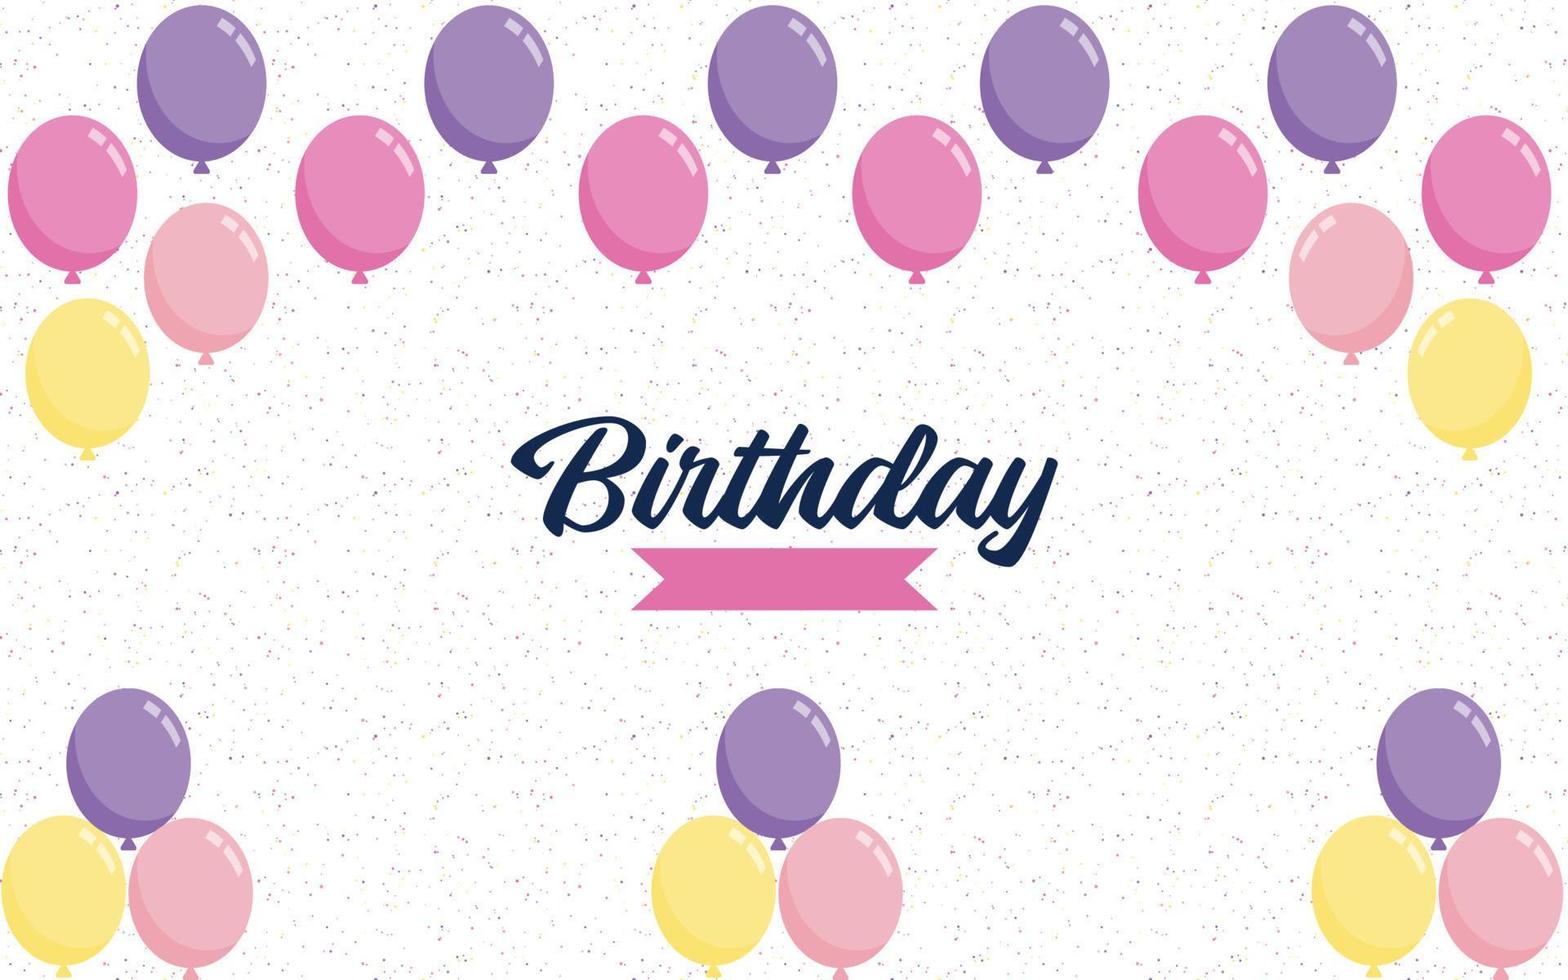 Happy Birthday lettering text banner with balloon Background vector